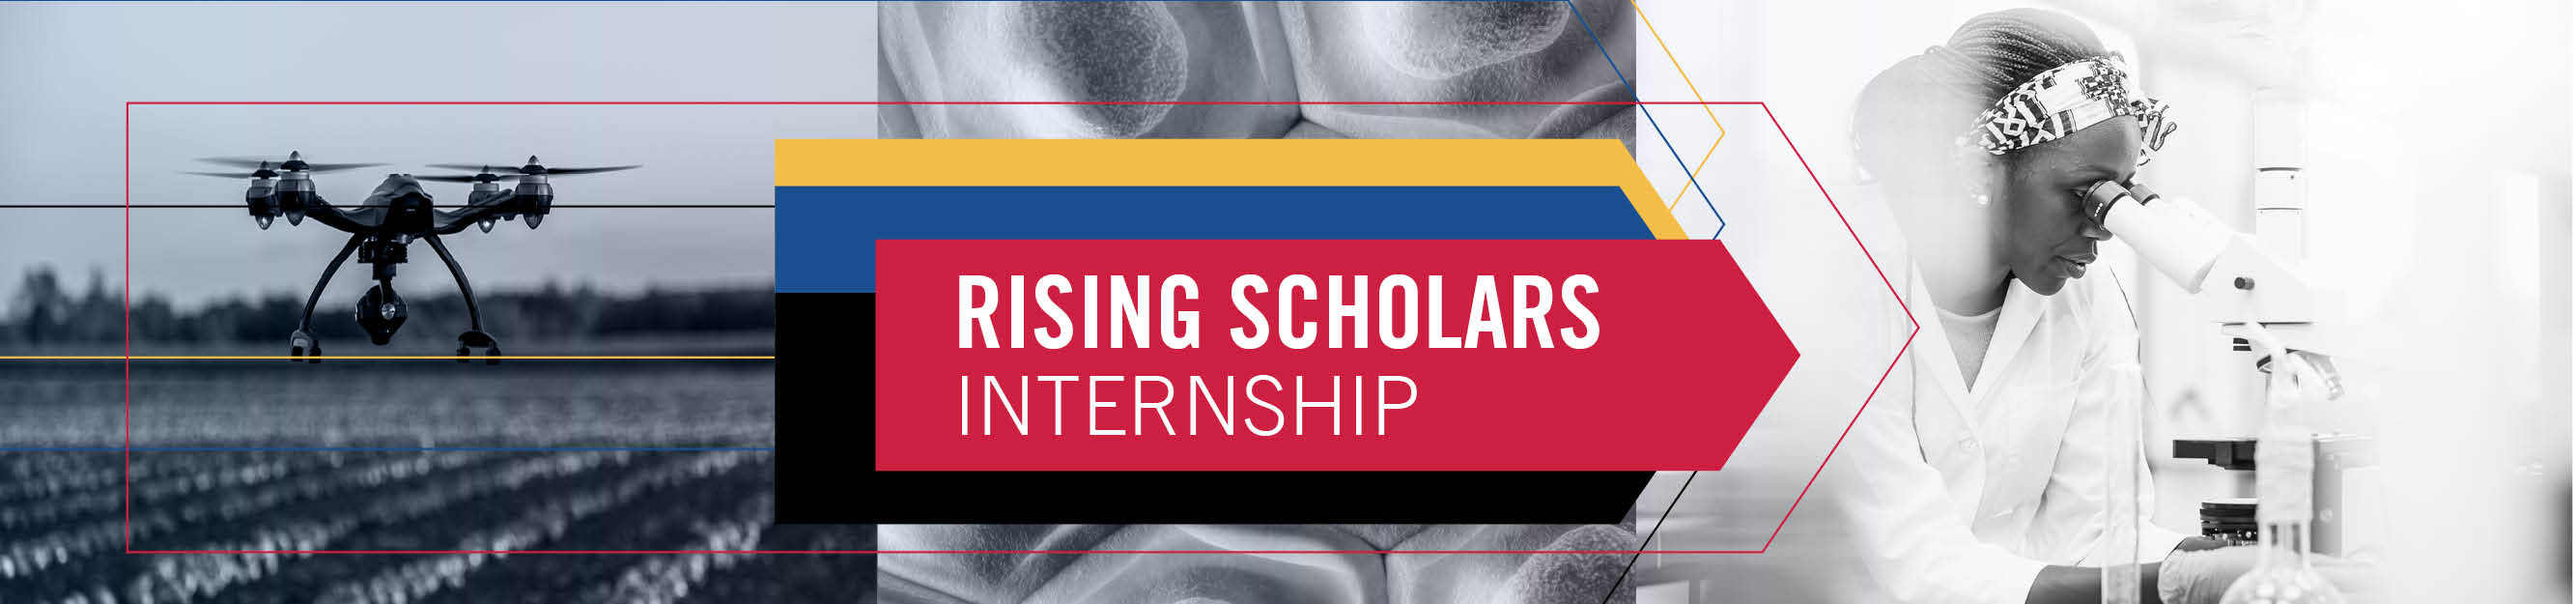 Rising Scholars Internship program banner image, including a photo of a drone and a person in a lab coat looking through a microscope